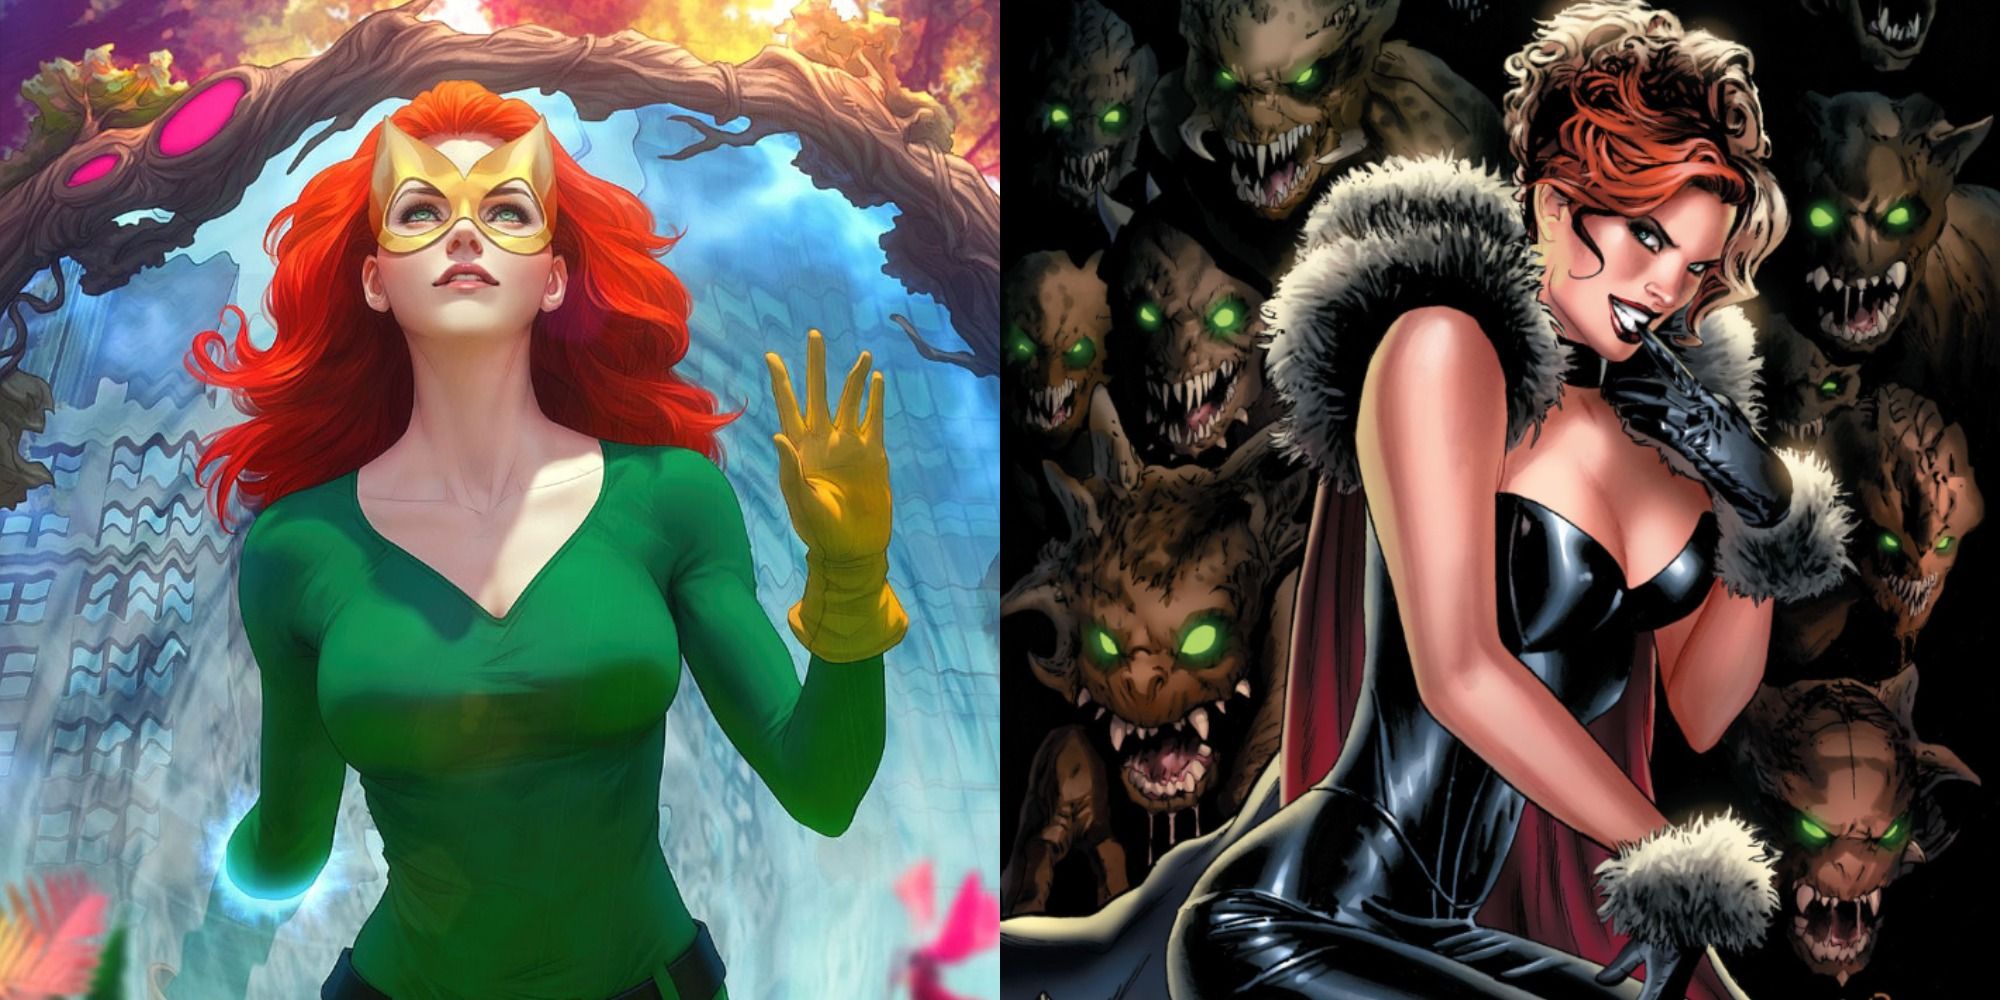 side by side images of Jean Grey as Marvel Girl and her clone Madelyne Pryor as the Goblin Queen